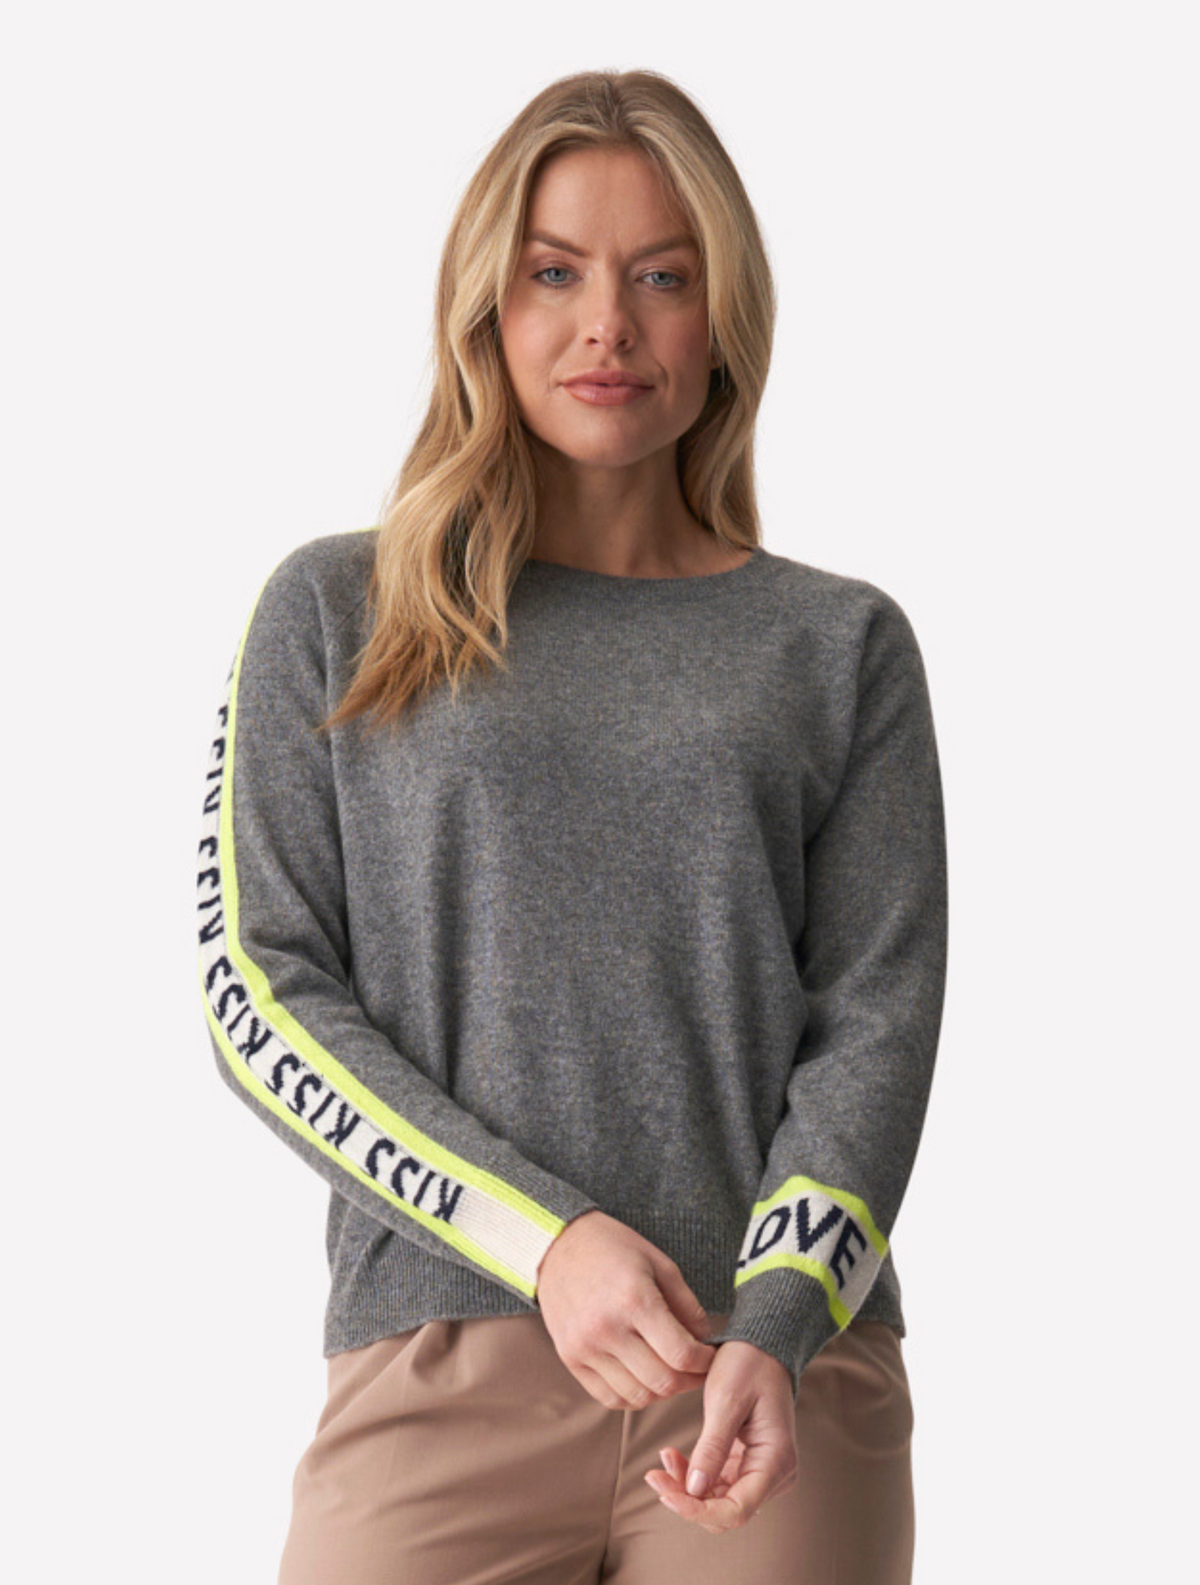 Grey jumper with white writing down the sleeves that says love and kisses